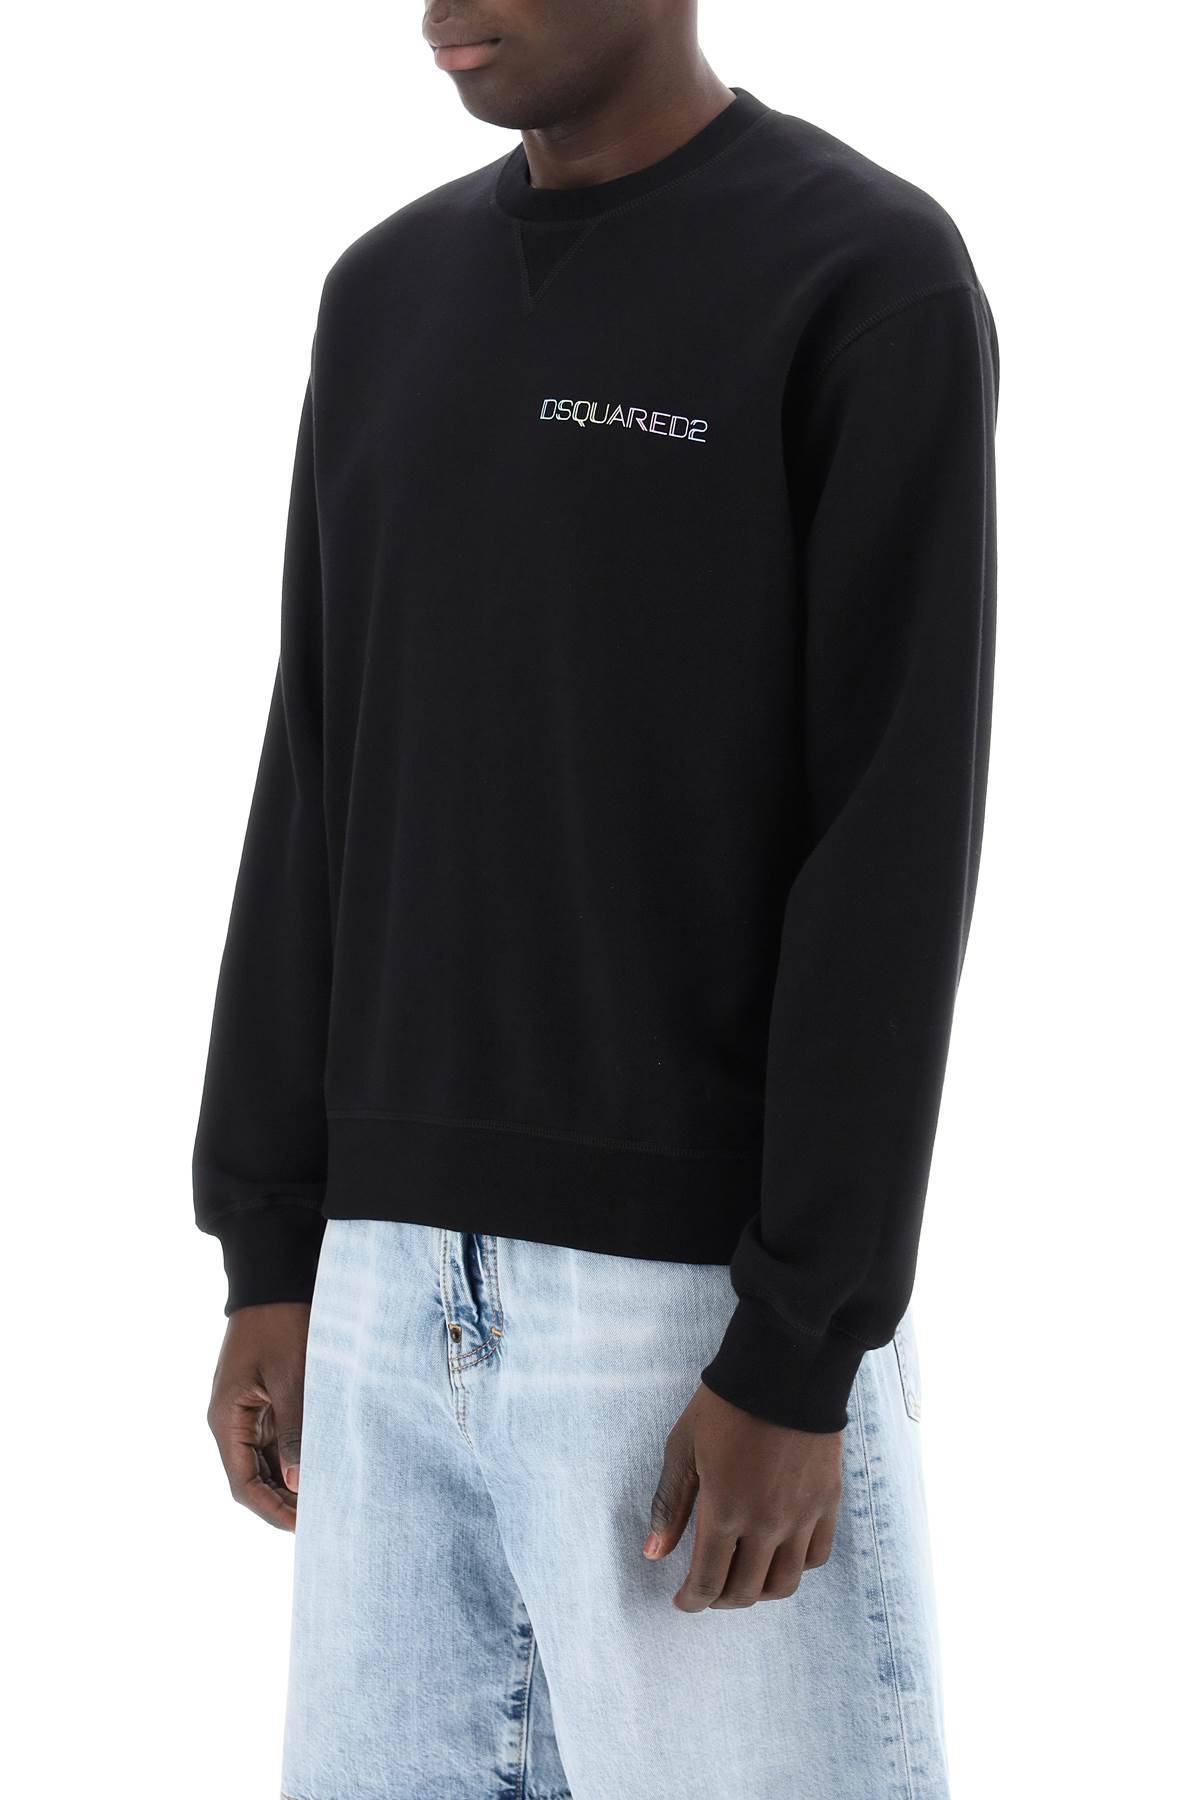 Shop Dsquared2 Cool Fit Printed Sweatshirt In Black